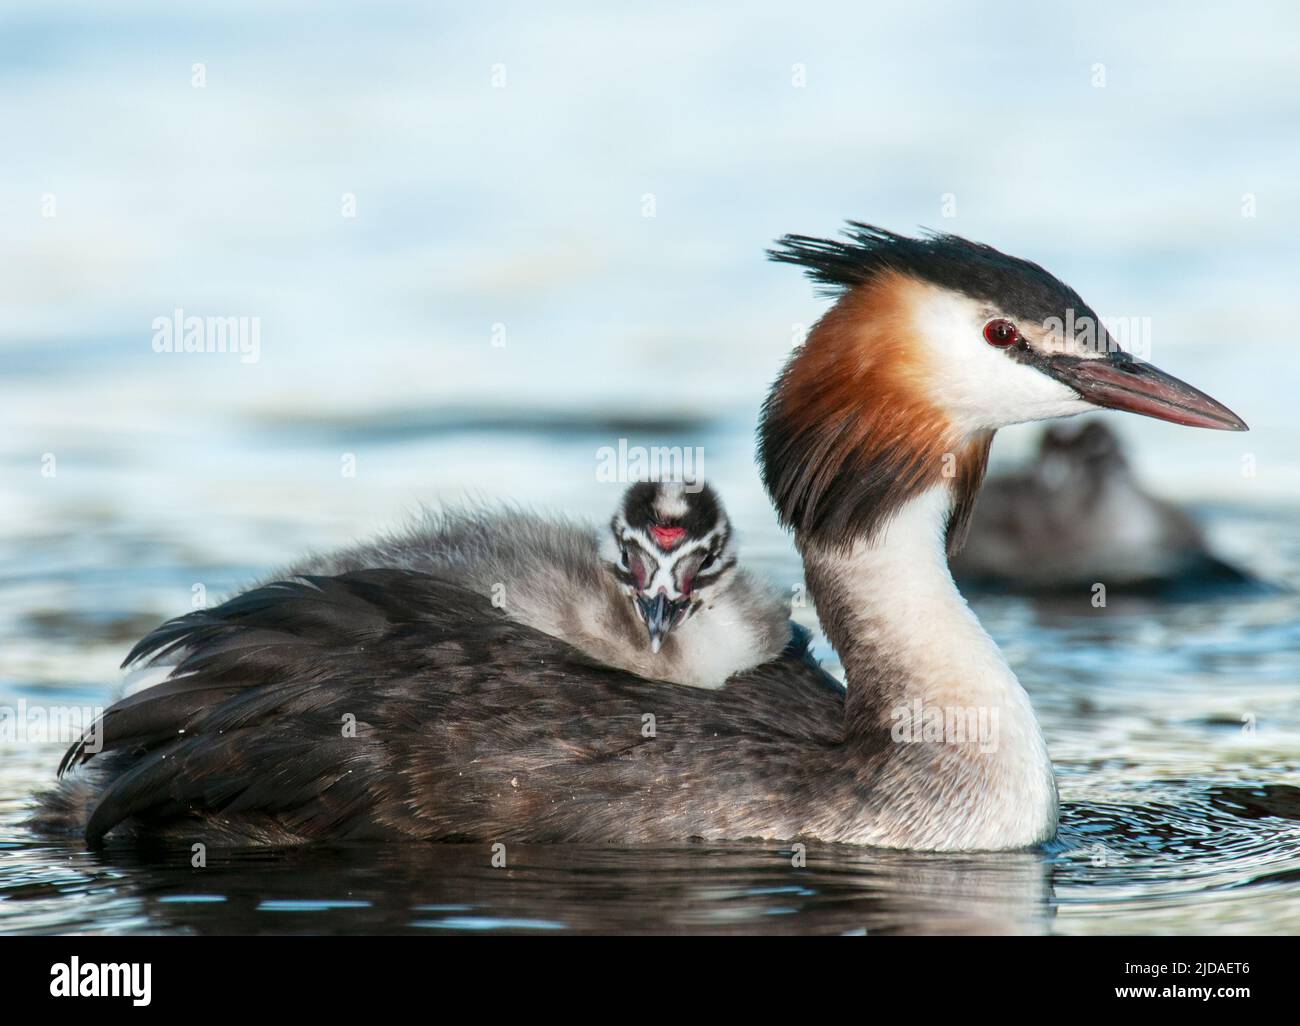 Great crested grebe, Podiceps cristatus, with chick carried on back of adult Stock Photo